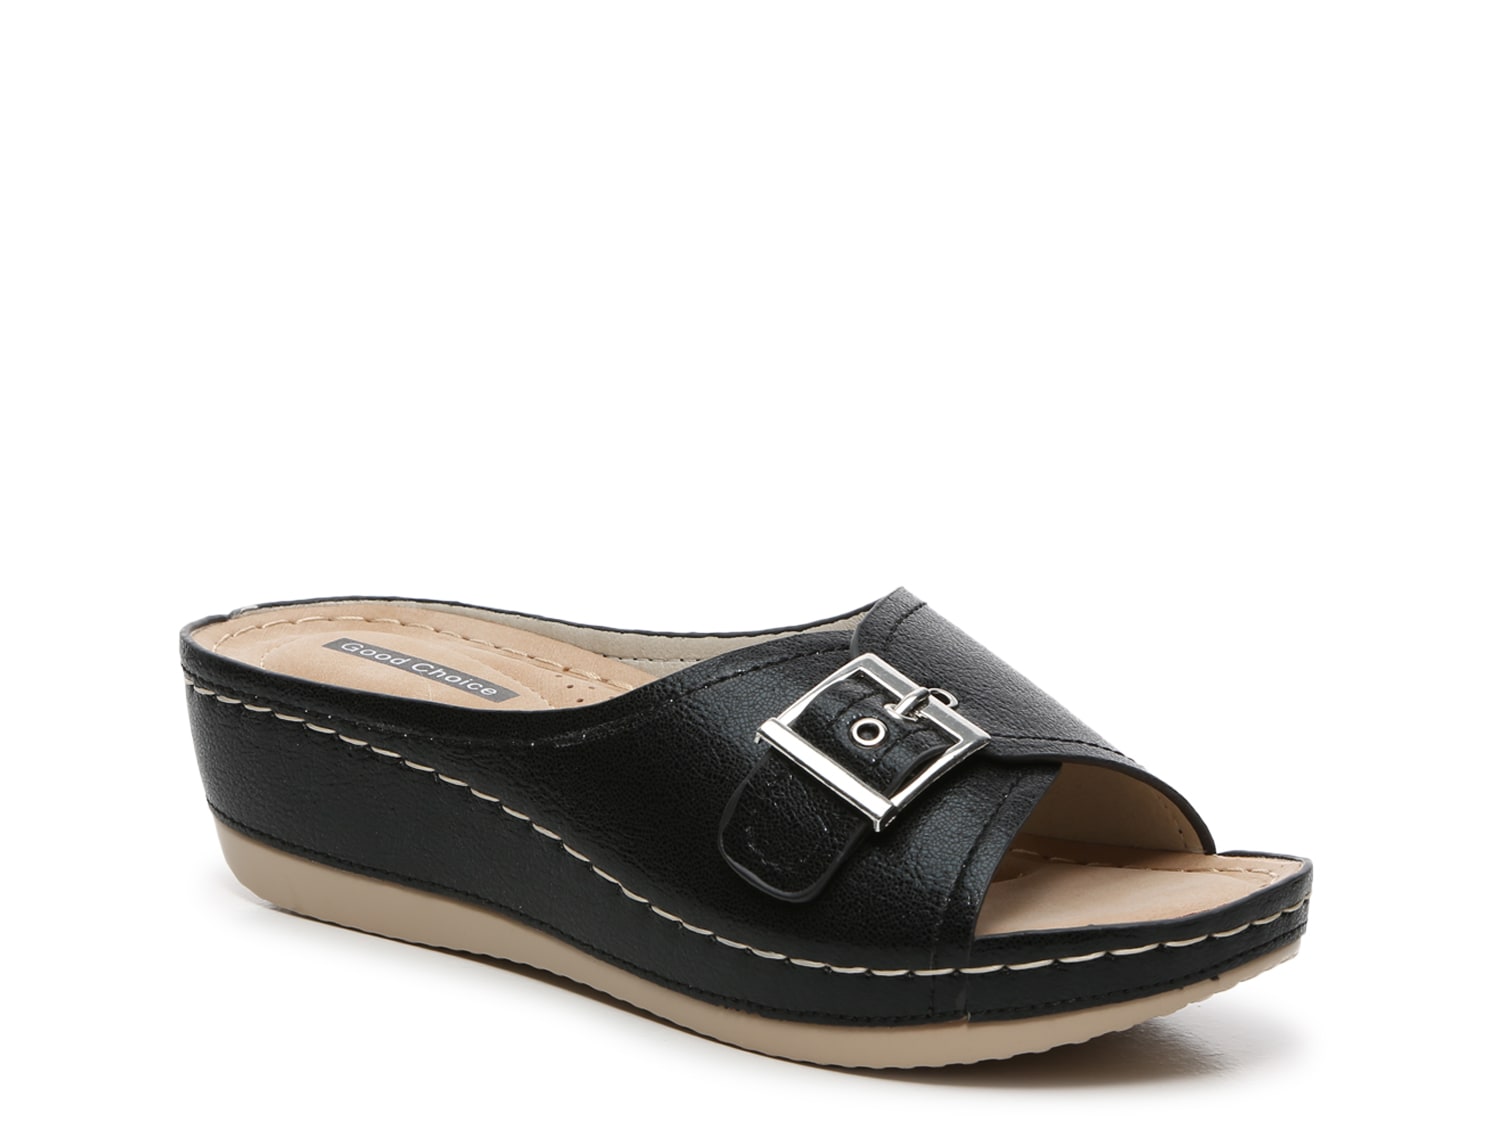 GC Shoes Justina Wedge Sandal Women's Shoes | DSW